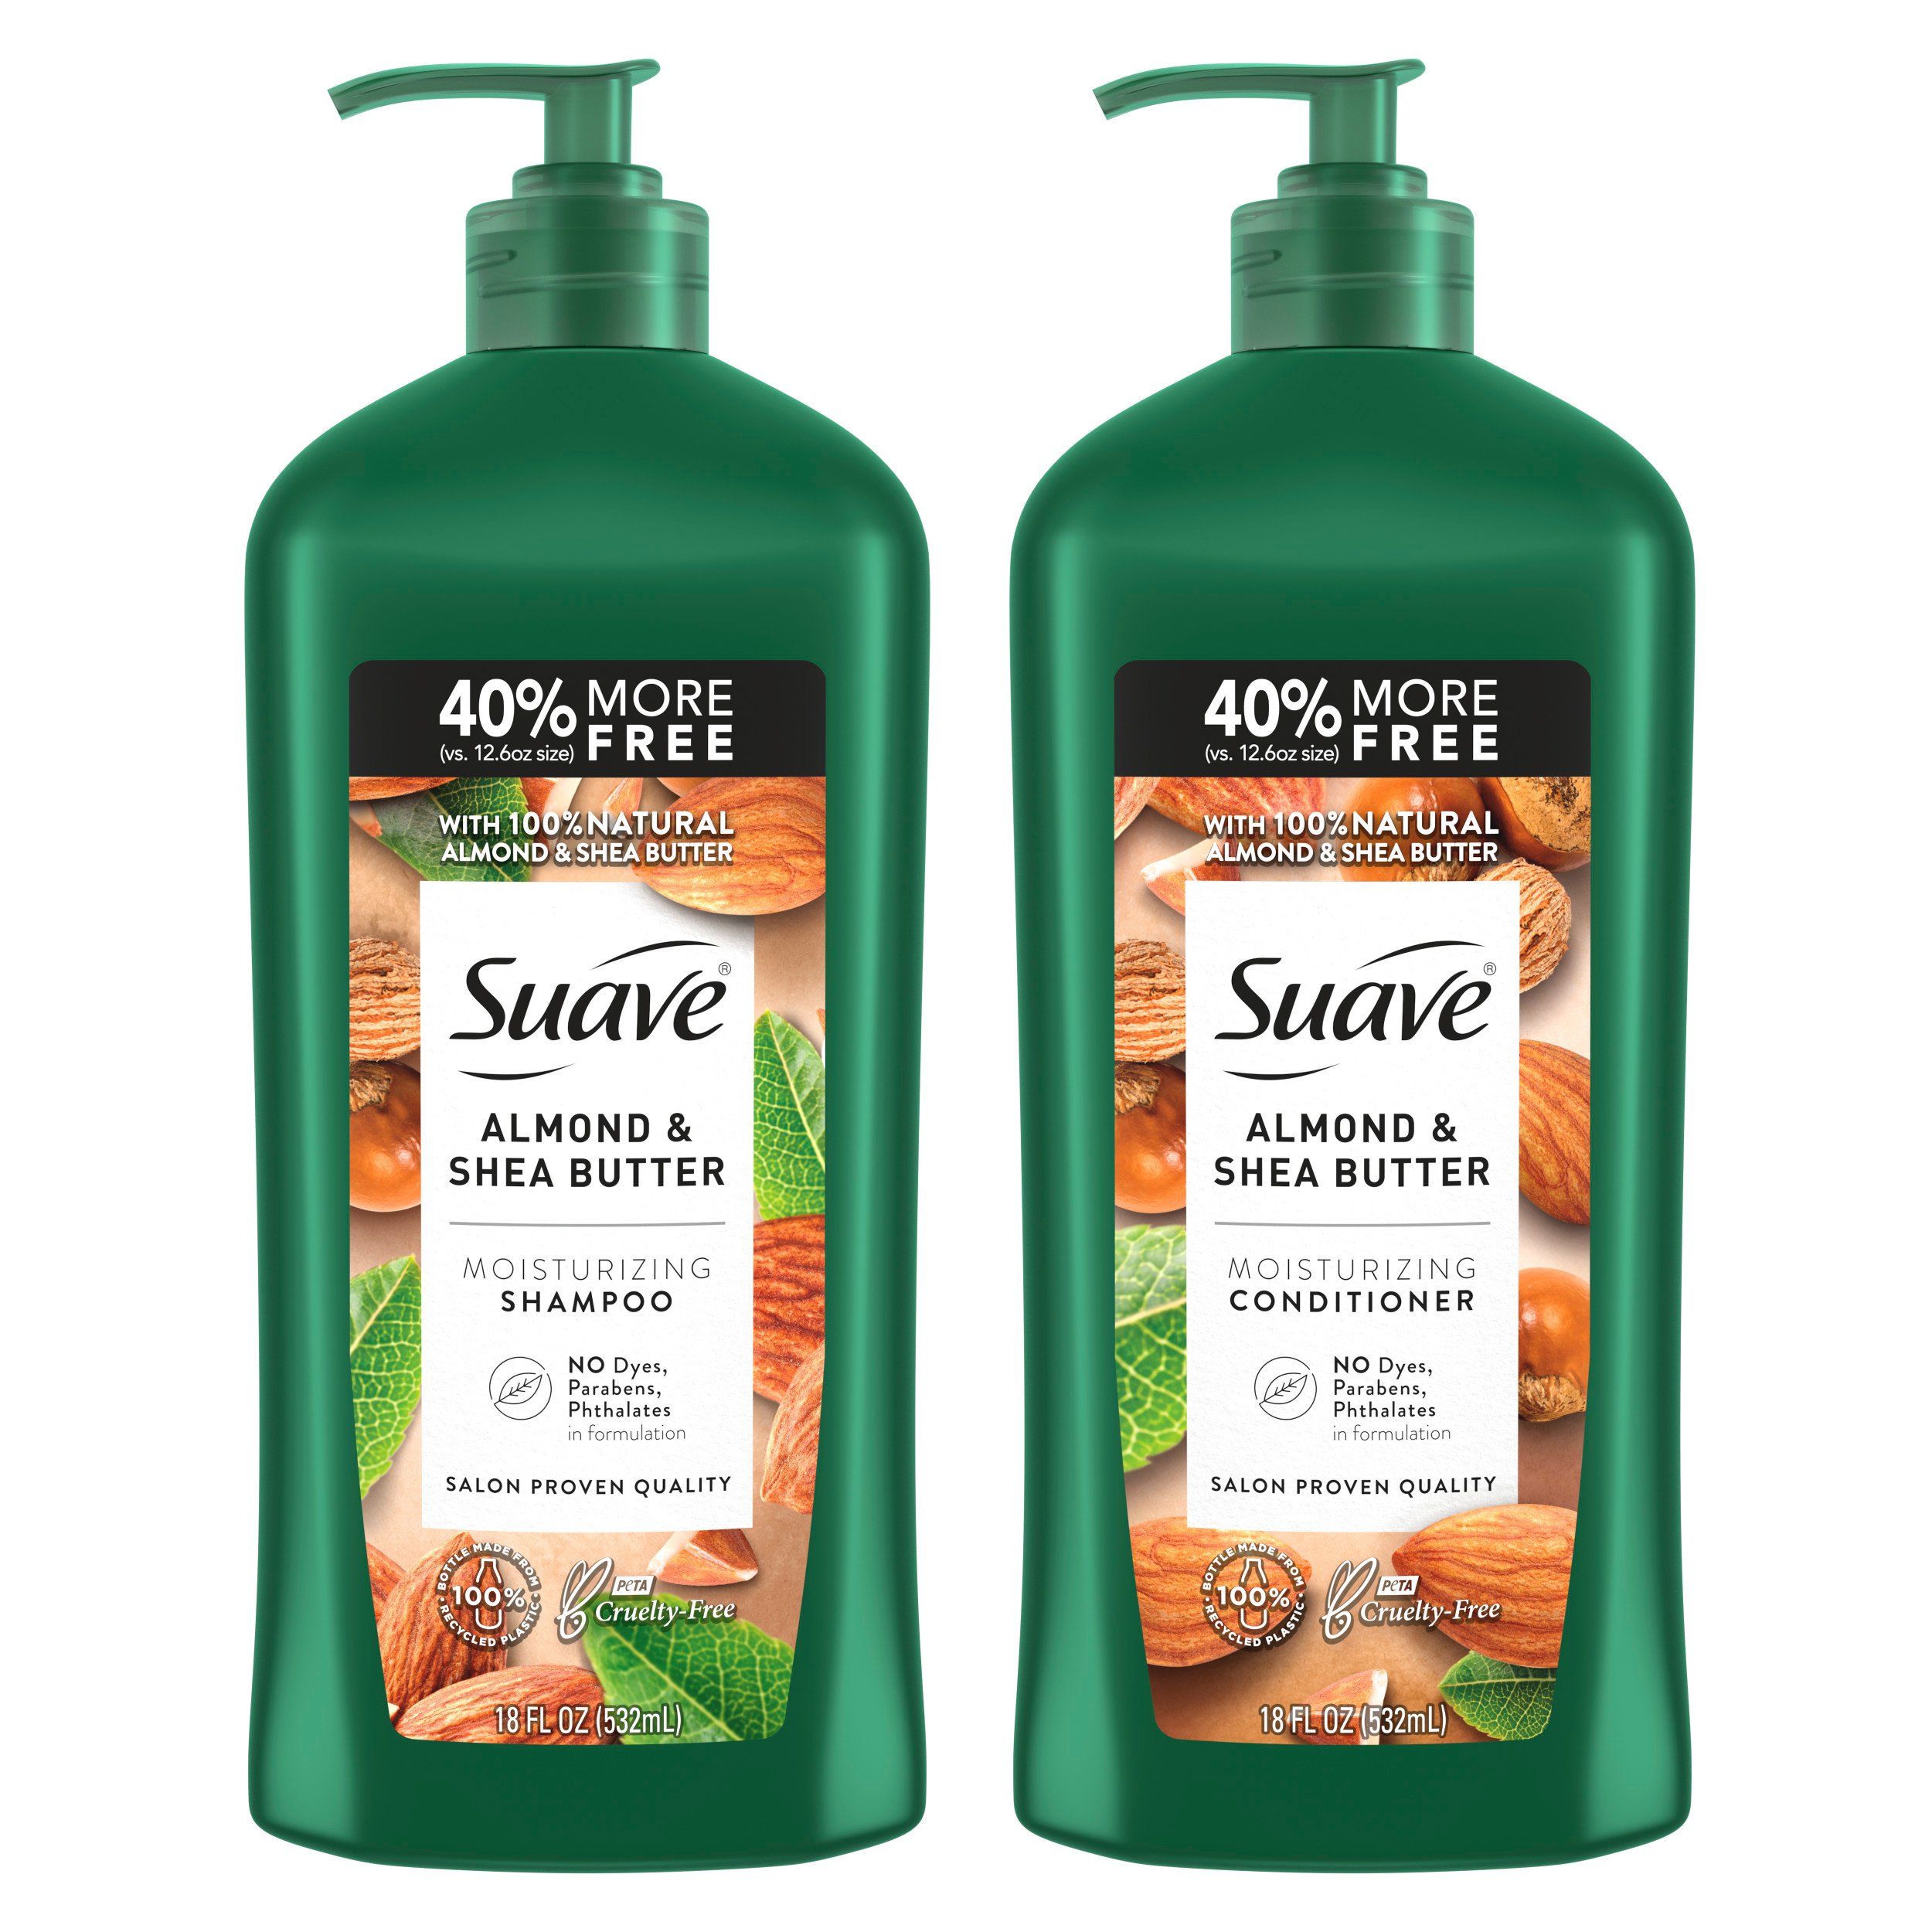 Suave Professionals Almond & Shea Butter Moisturizing and Conditioner - Shop Styling Products & Treatments H-E-B